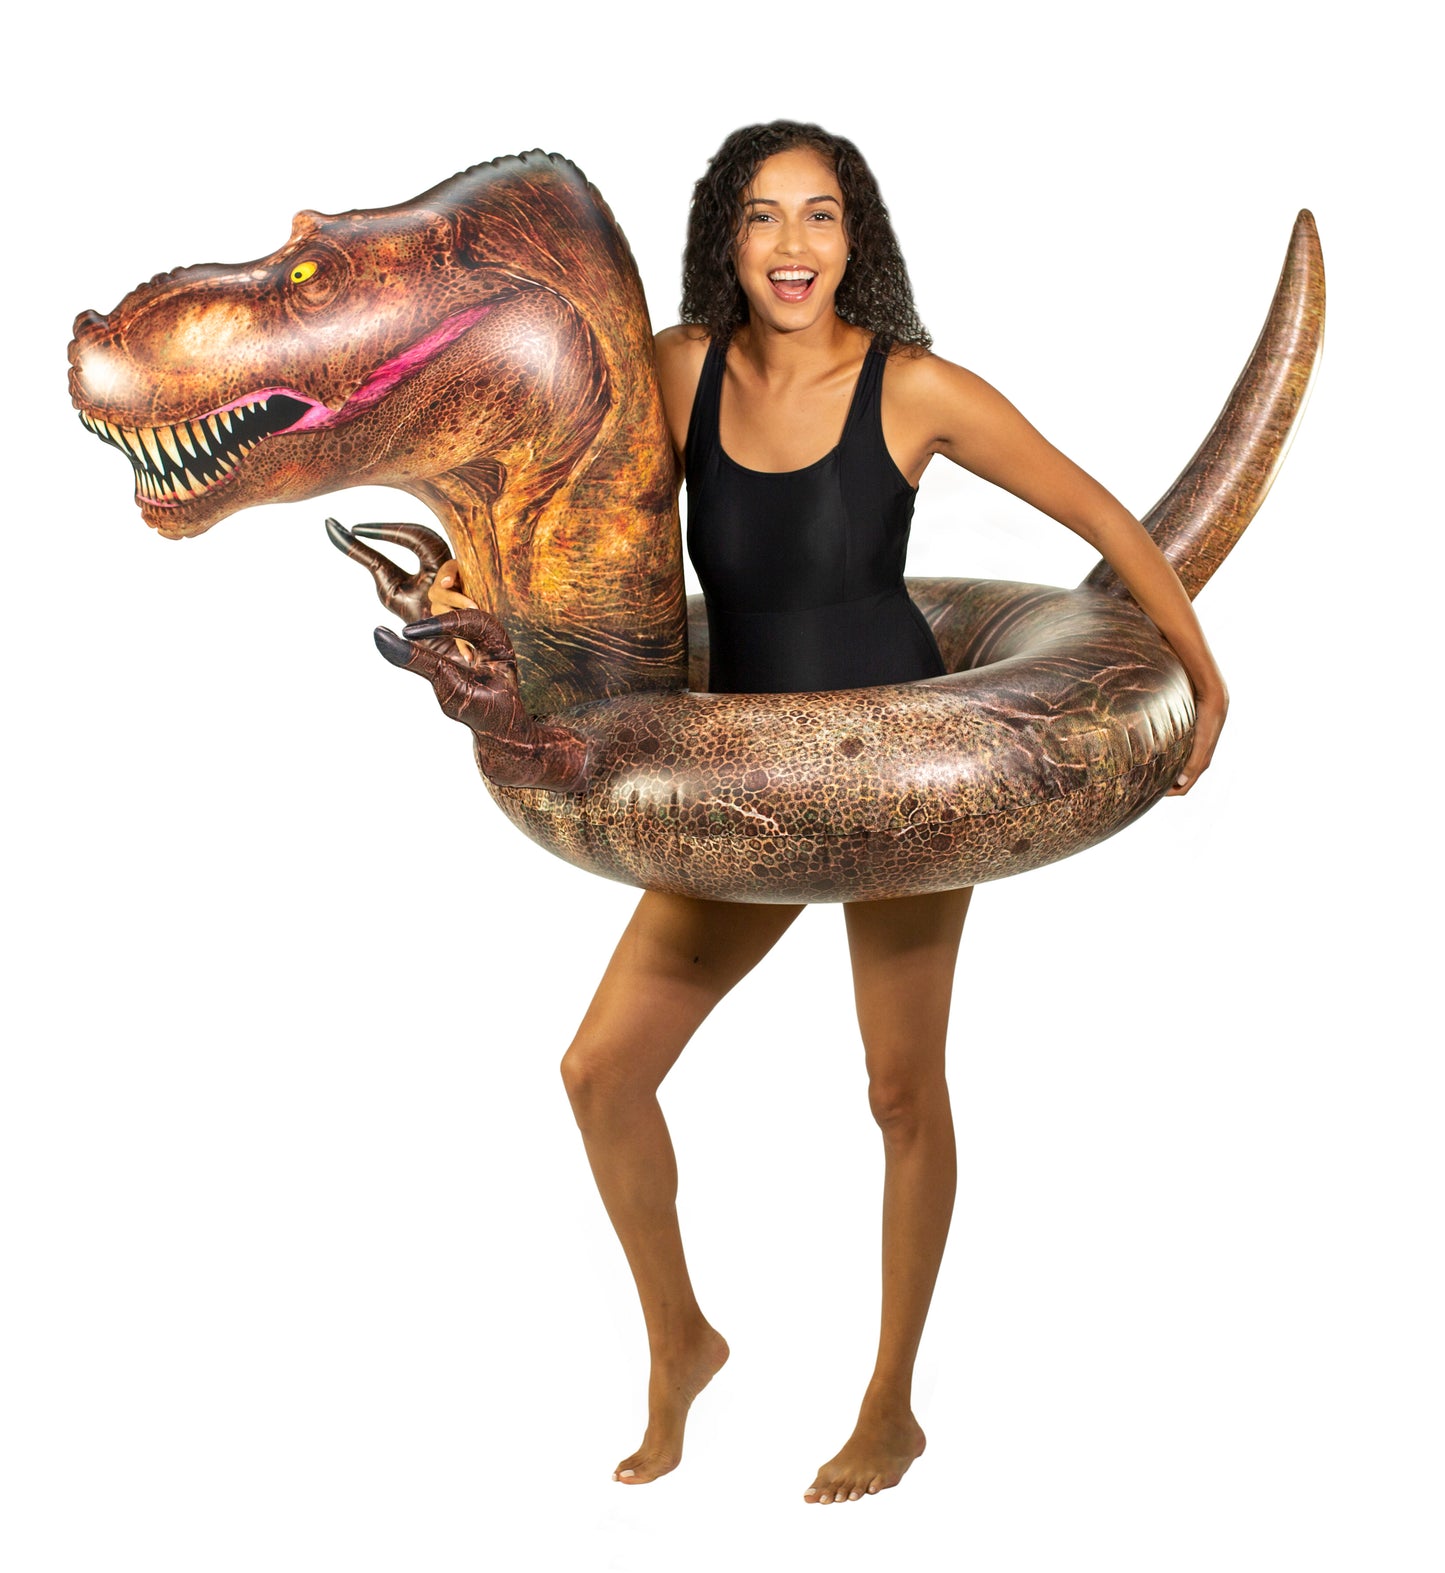 PoolCandy 48" Jumbo T-Rex Tube with Claws